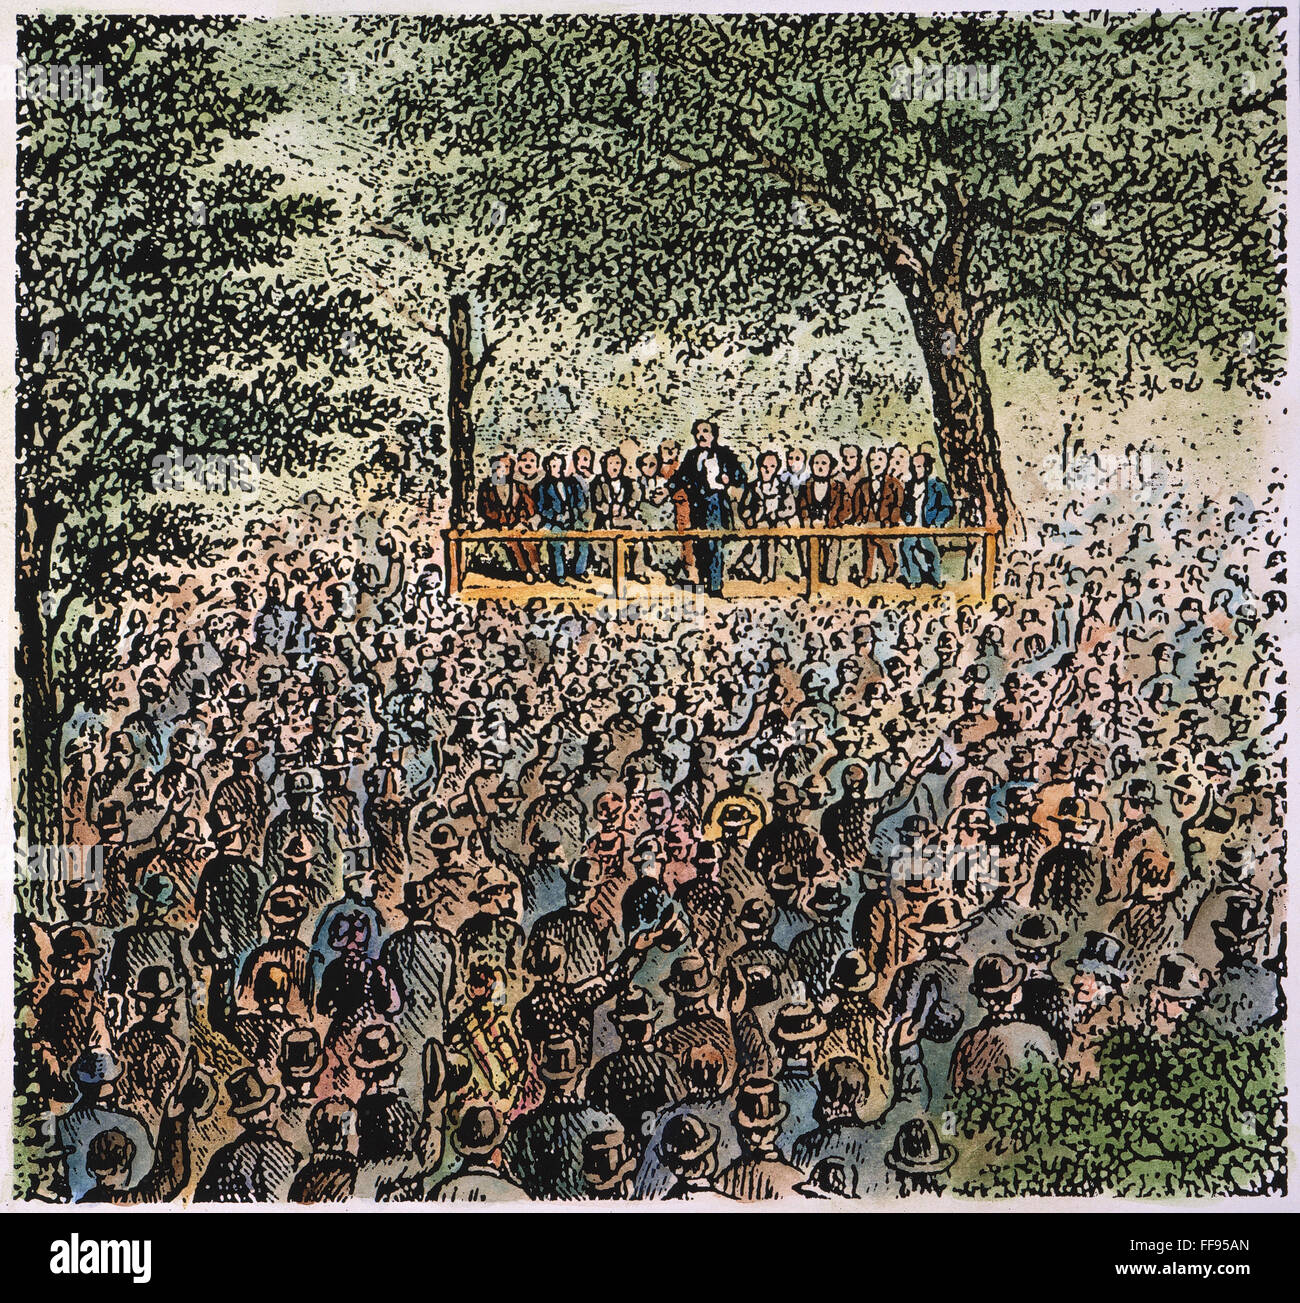 REPUBLICAN CONVENTION, 1854. /nThe first Republican convention, held outdoors at Jackson, Michigan, on 6 July 1854. Contemporary American line engraving. Stock Photo